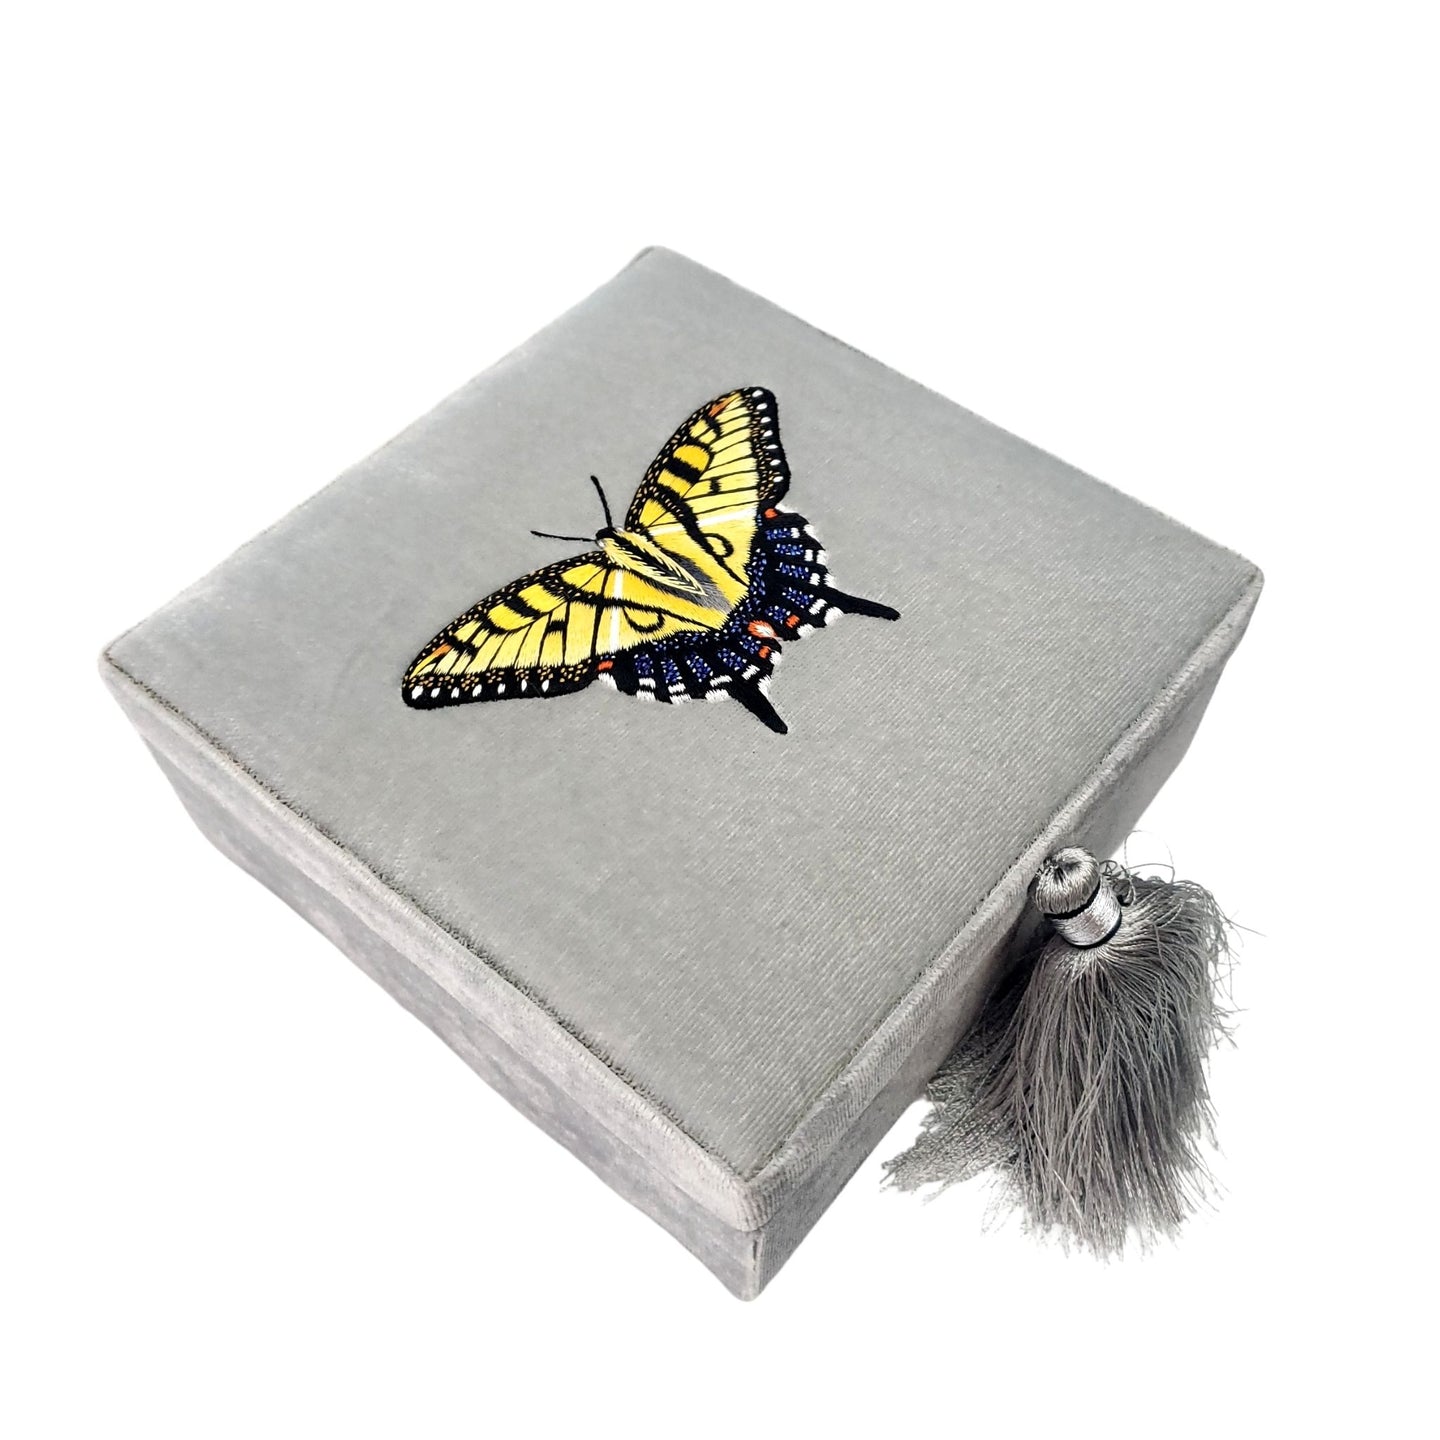 Hand embroidered yellow swallowtail butterfly on gray velvet decorative box. 